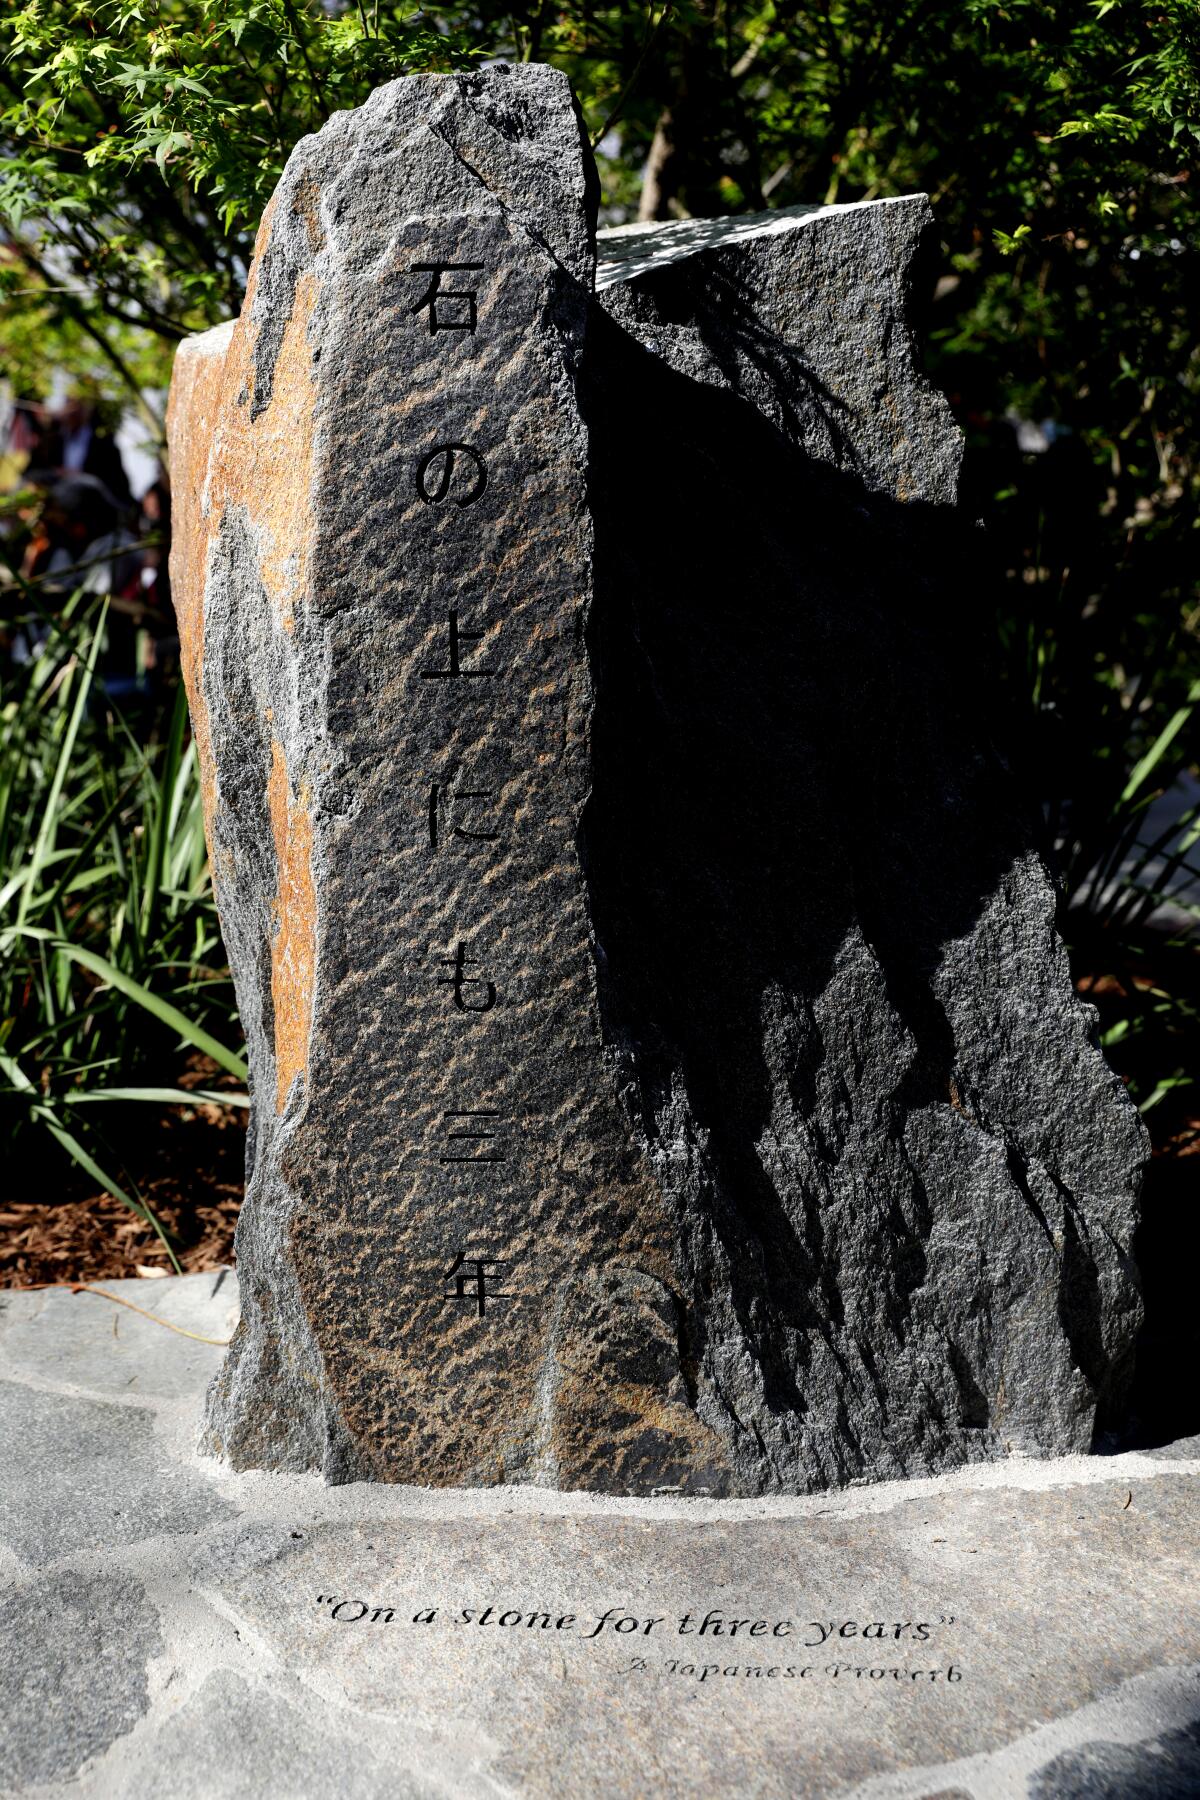 A stone monument with Japanese writing inscribed 